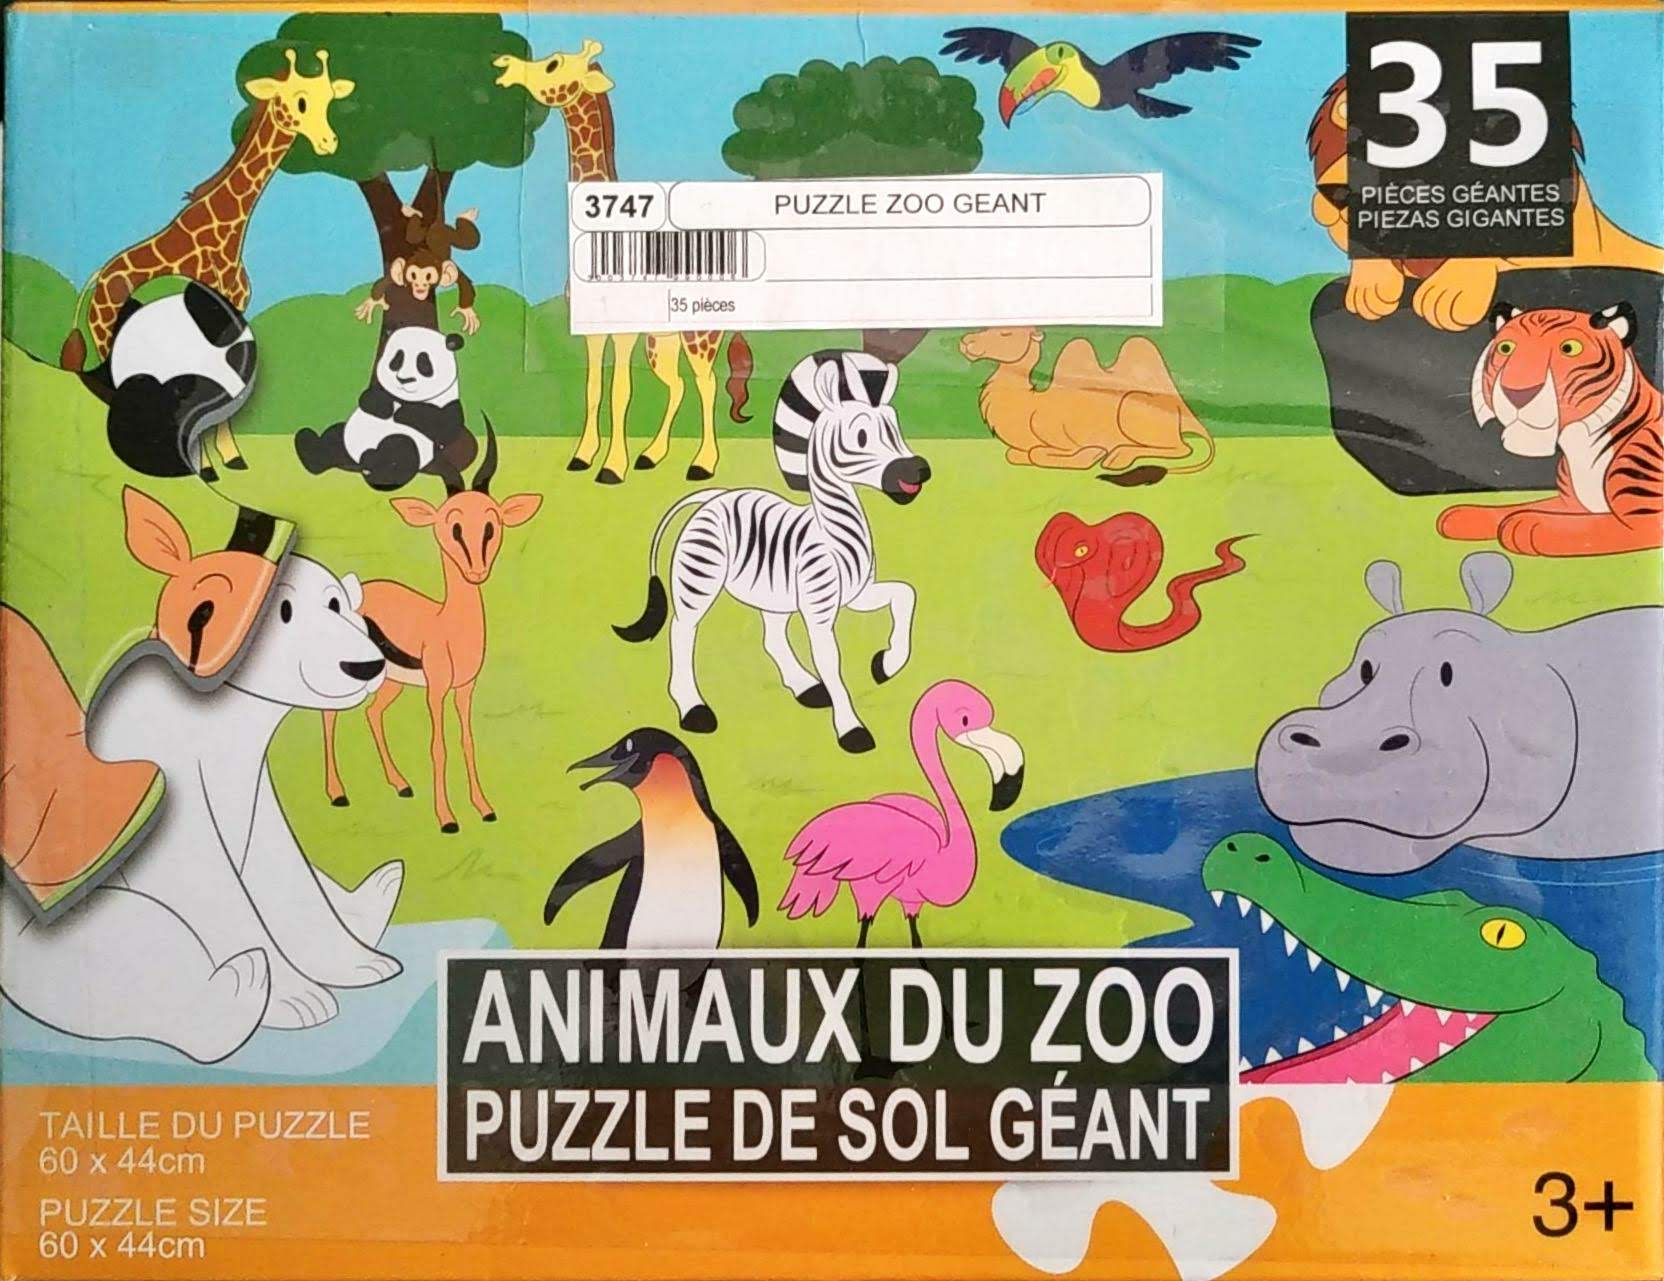 PUZZLE ZOO GEANT